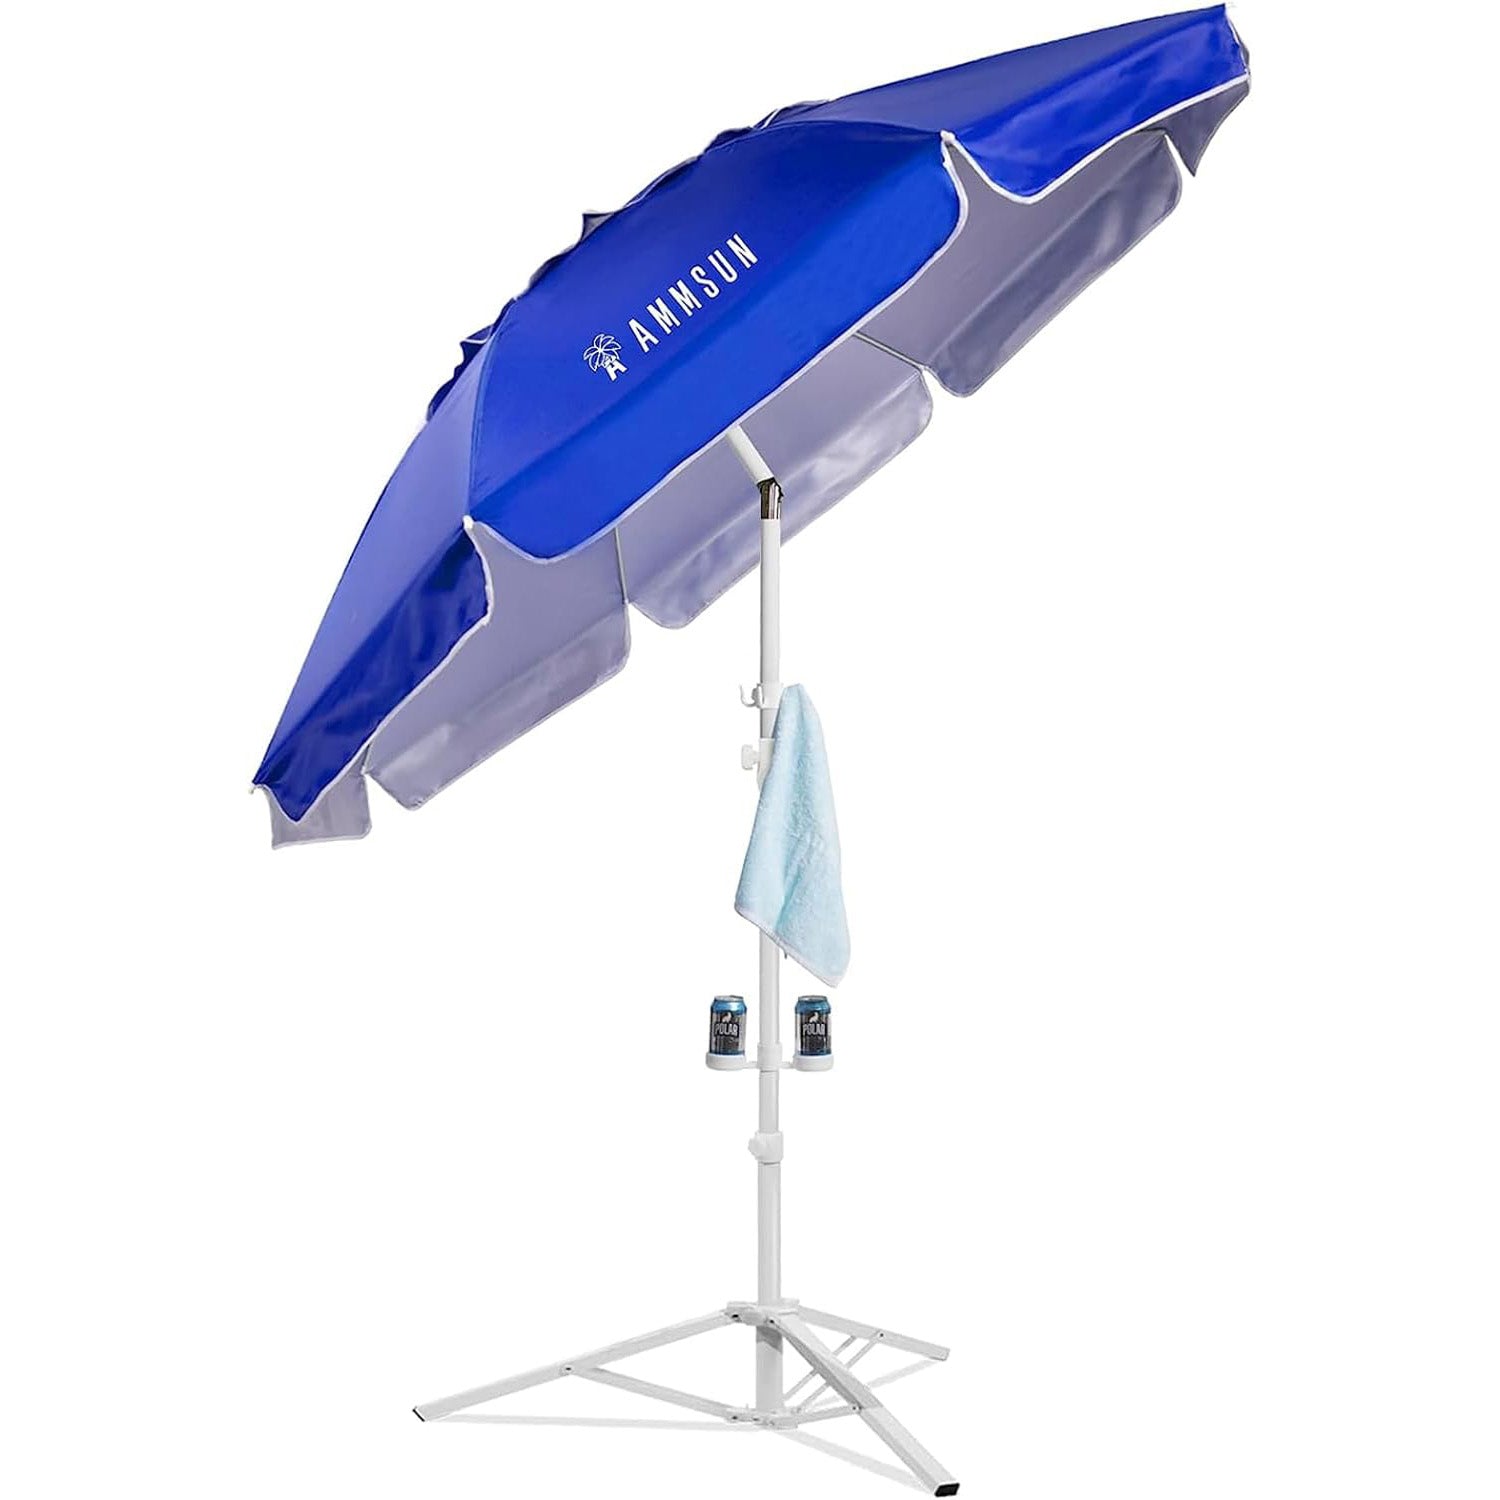 AMMSUN 6.5ft Lightweight Portable Sports Umbrella with Stand Blue